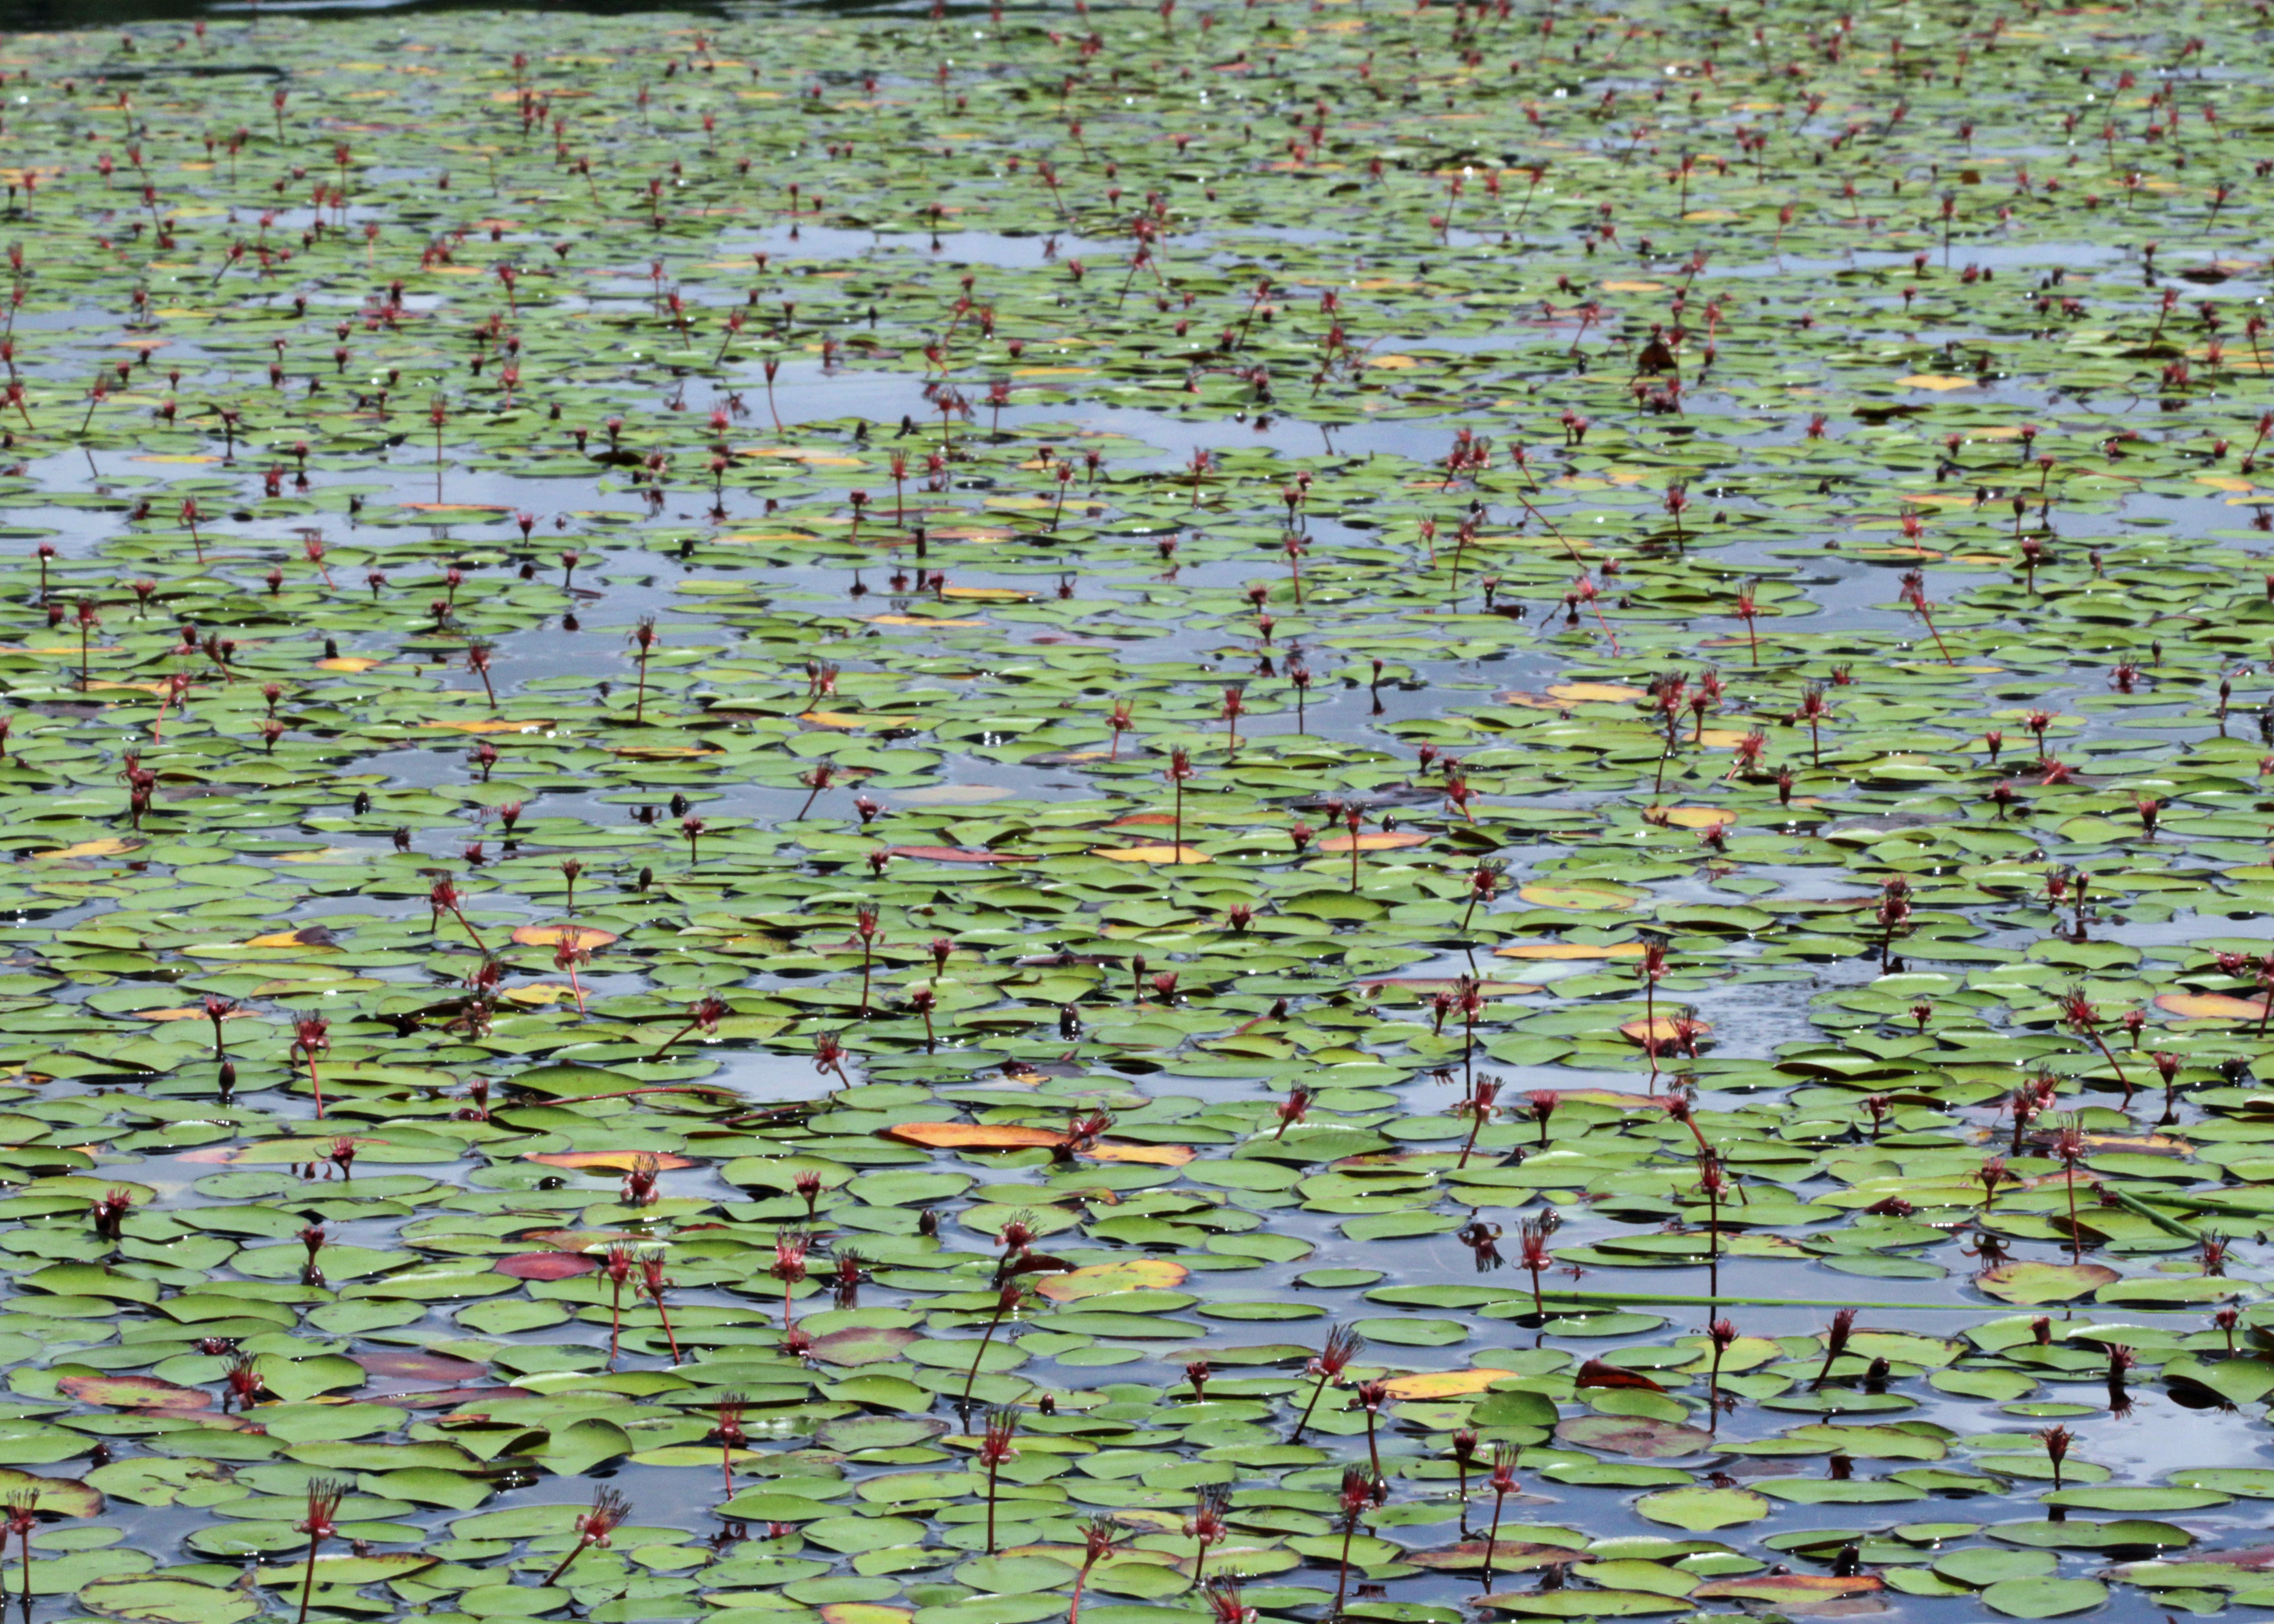 The Scientific Name is Brasenia schreberi. You will likely hear them called Water-shield, Purple Wen-dock. This picture shows the A mass of blossoming Brasenia scherberi covering a sandhills pool in early June, Carolina Sanhills NWR. of Brasenia schreberi